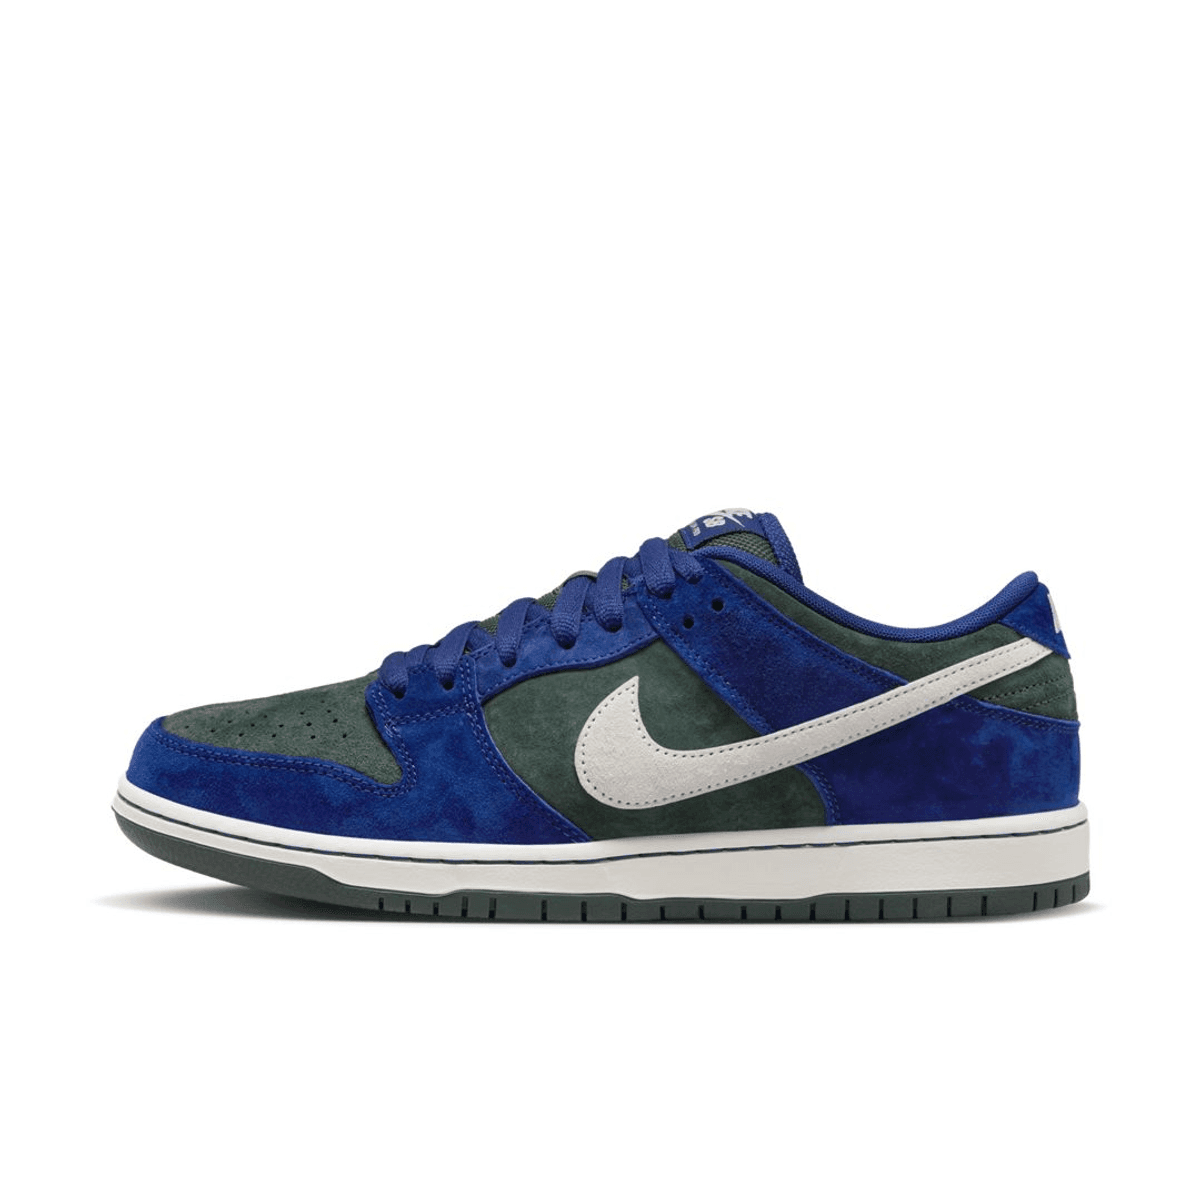 The Nike SB Dunk Low “Deep Royal Blue” Releases February 2024